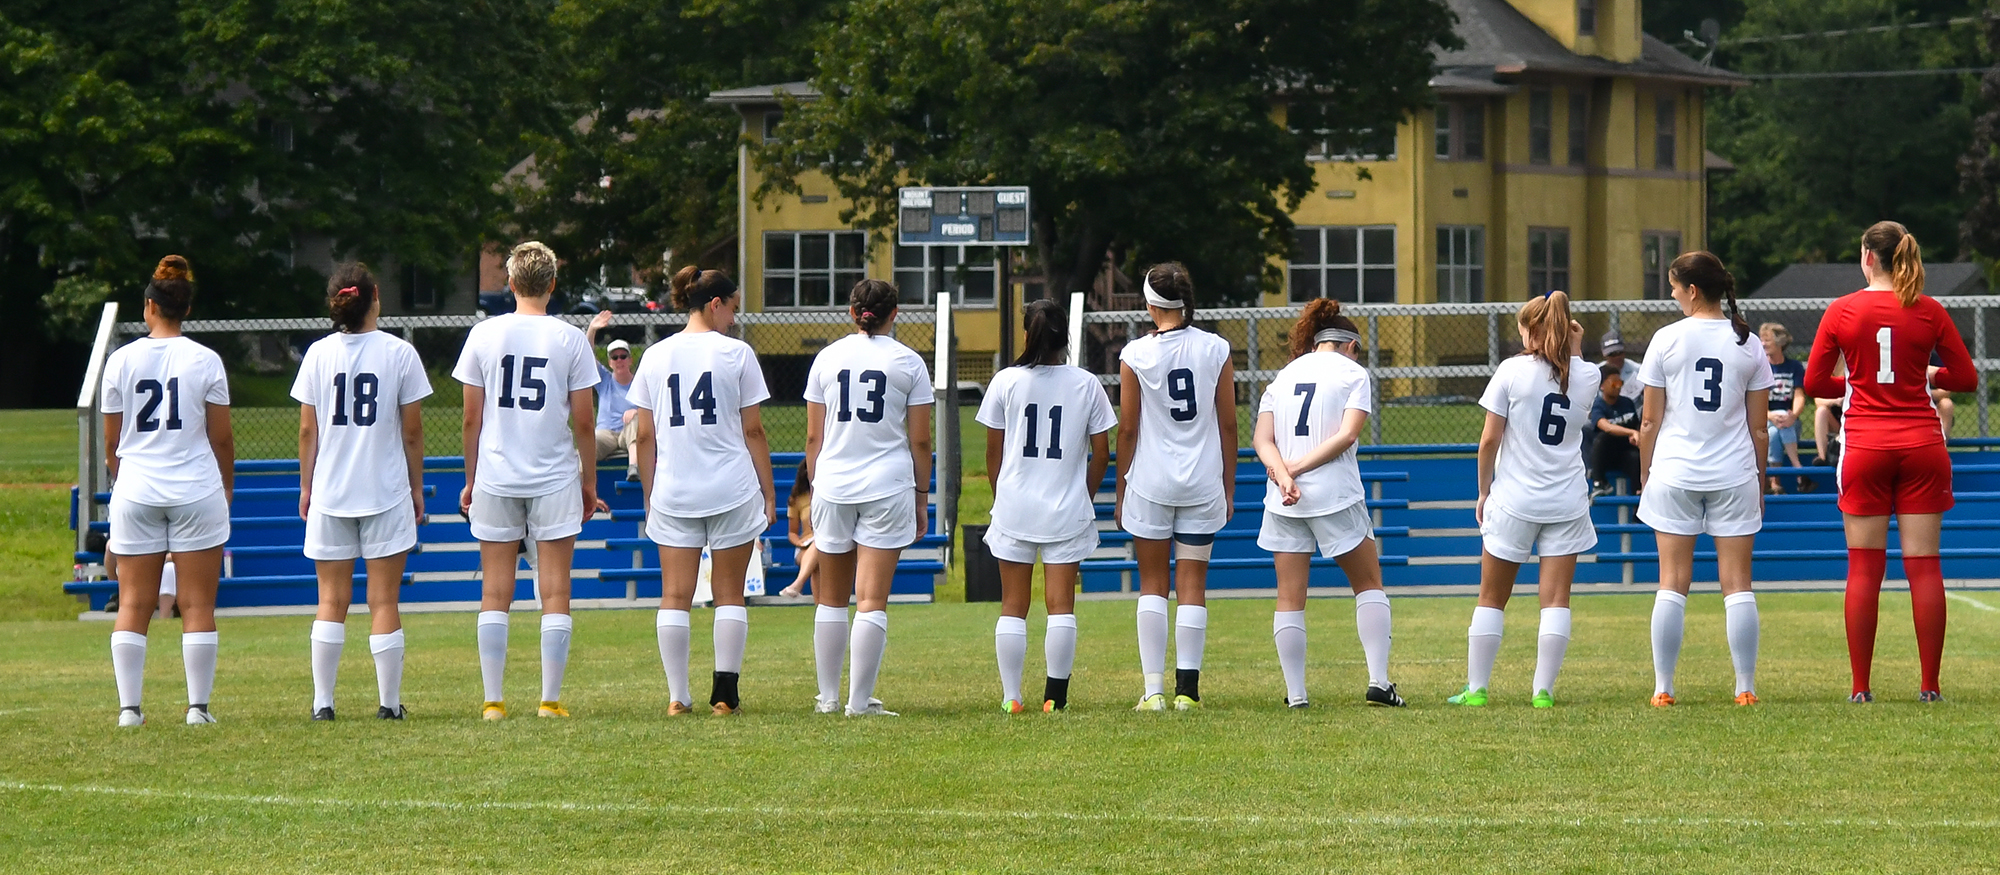 Photo of Lyons soccer starting lineup